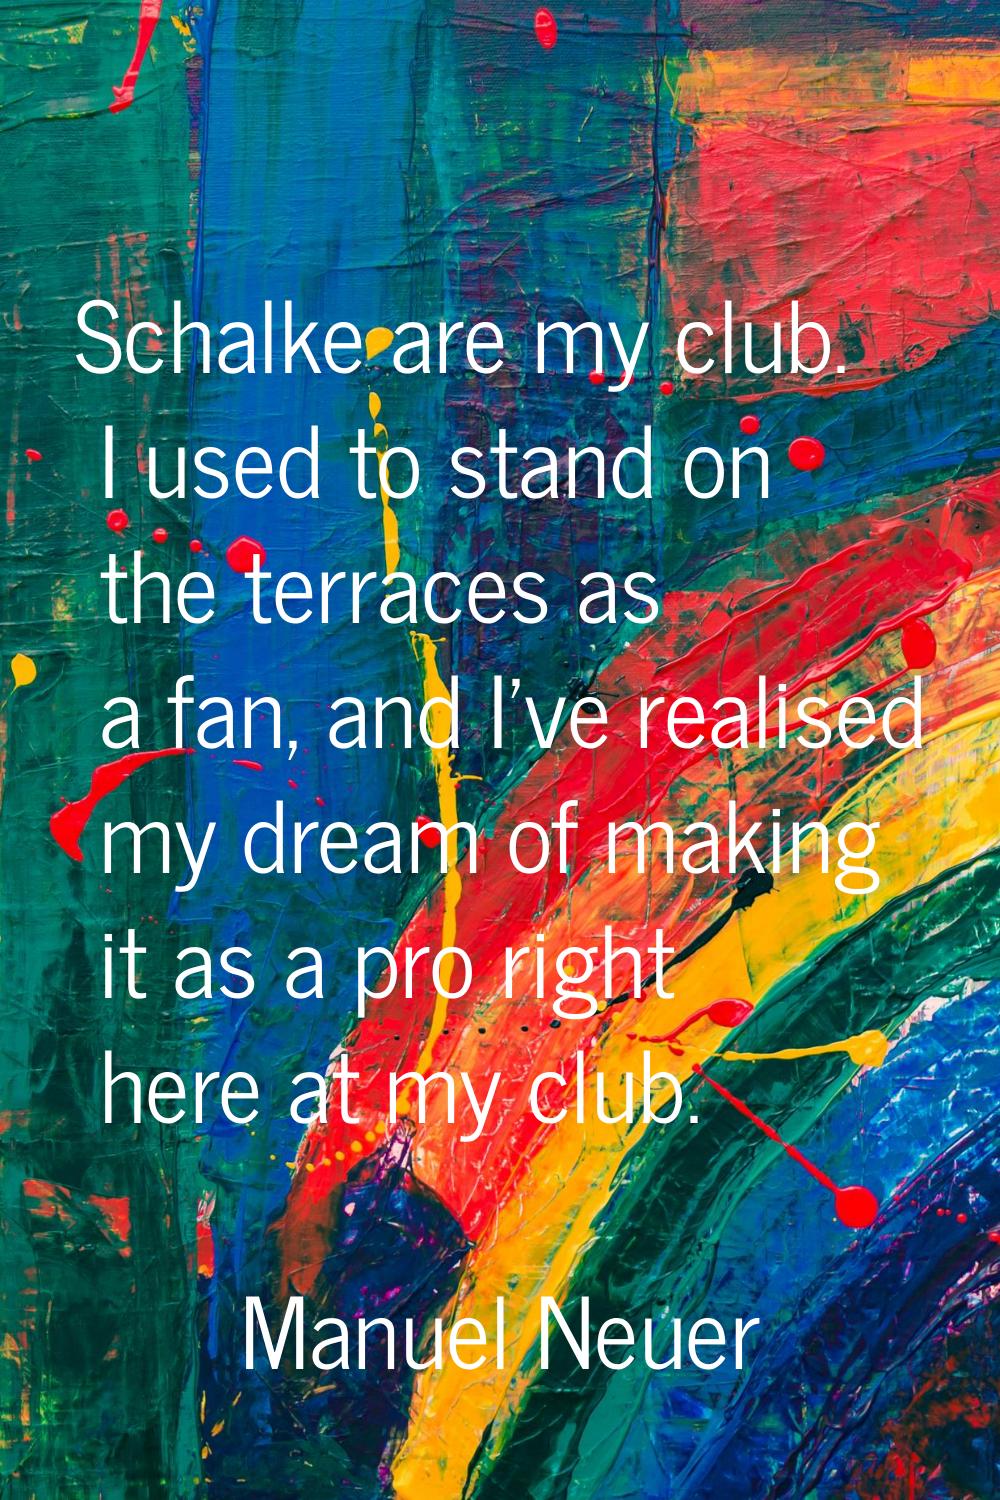 Schalke are my club. I used to stand on the terraces as a fan, and I've realised my dream of making